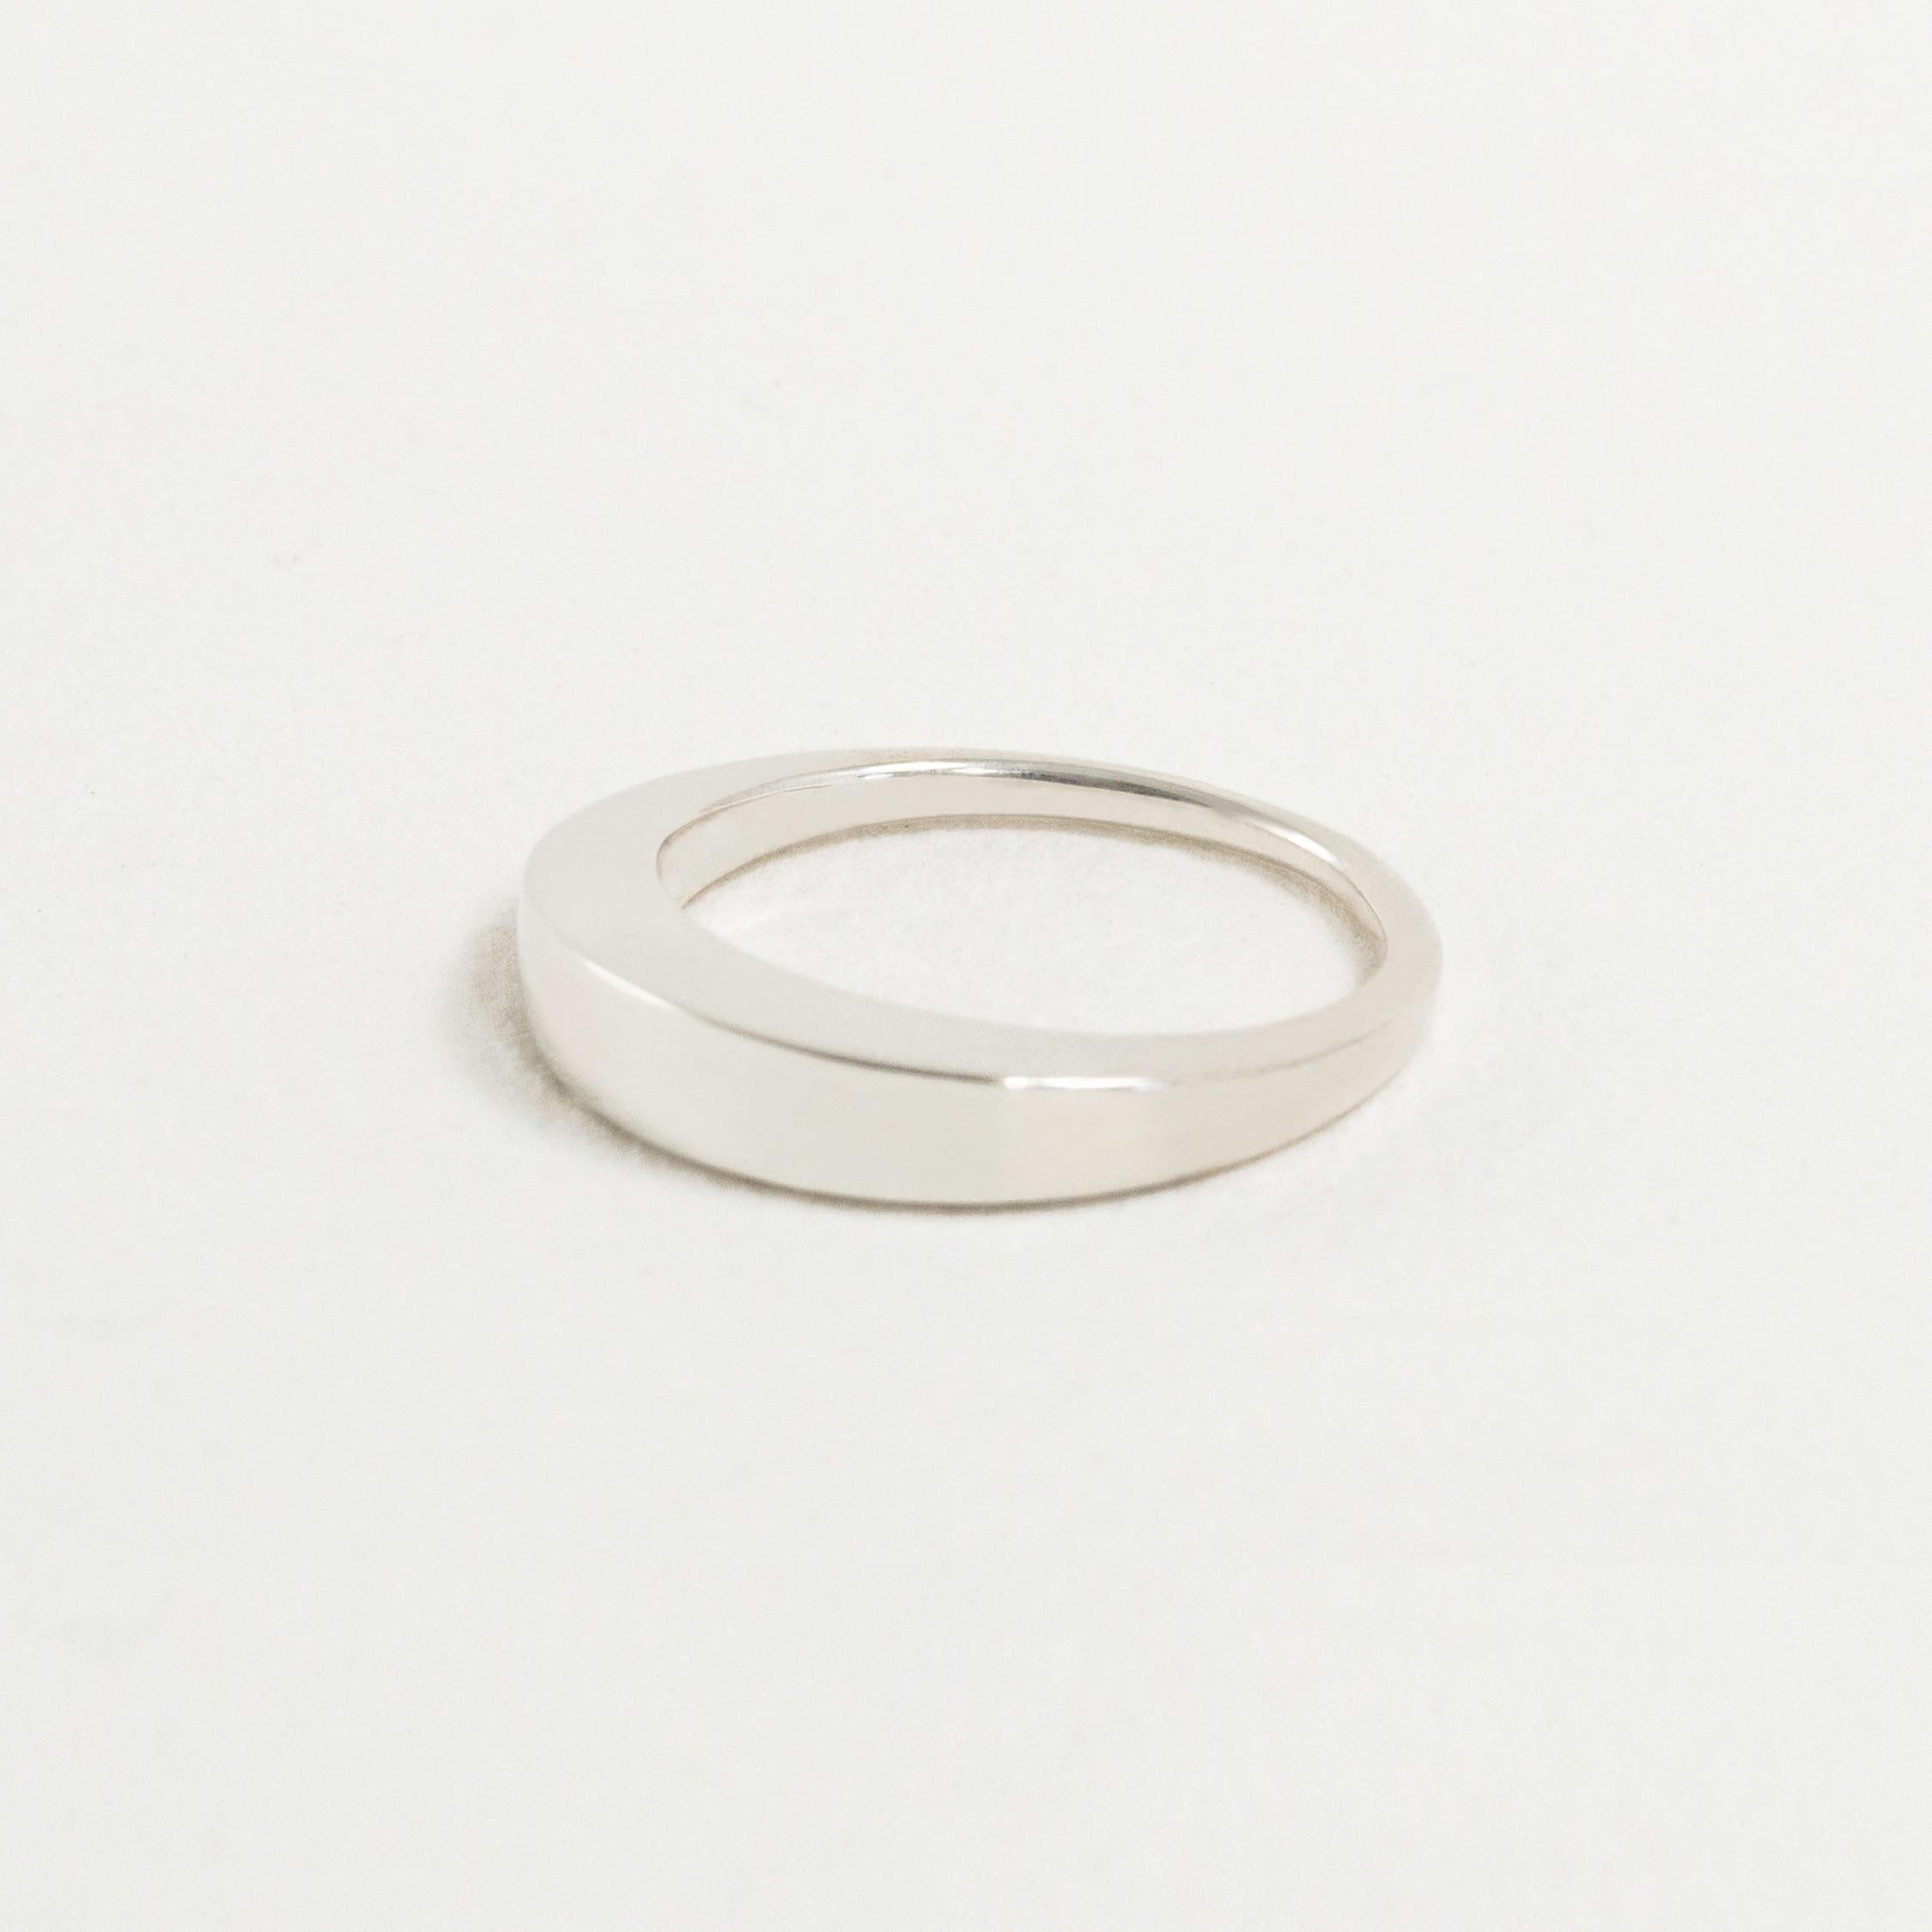 The Revolution Square ring in silver steadily cycles from a lower circular band to a square-profile top and back again. As the classic rounded base shapeshifts into a bold and balanced gesture , this piece reminds us to enjoy life’s transitional